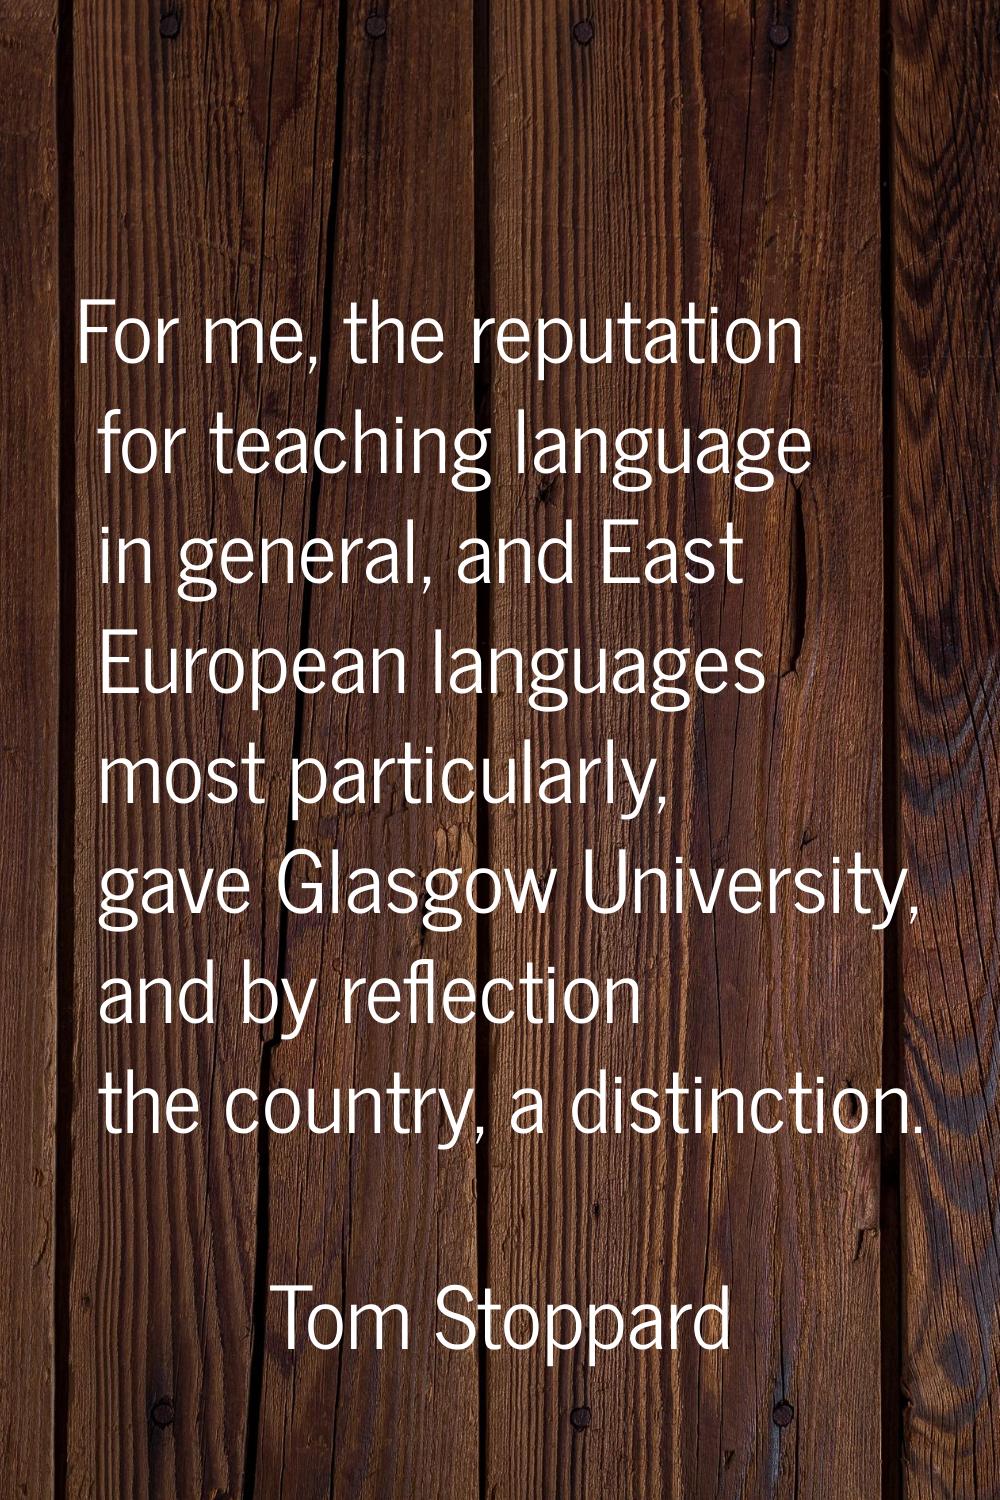 For me, the reputation for teaching language in general, and East European languages most particula